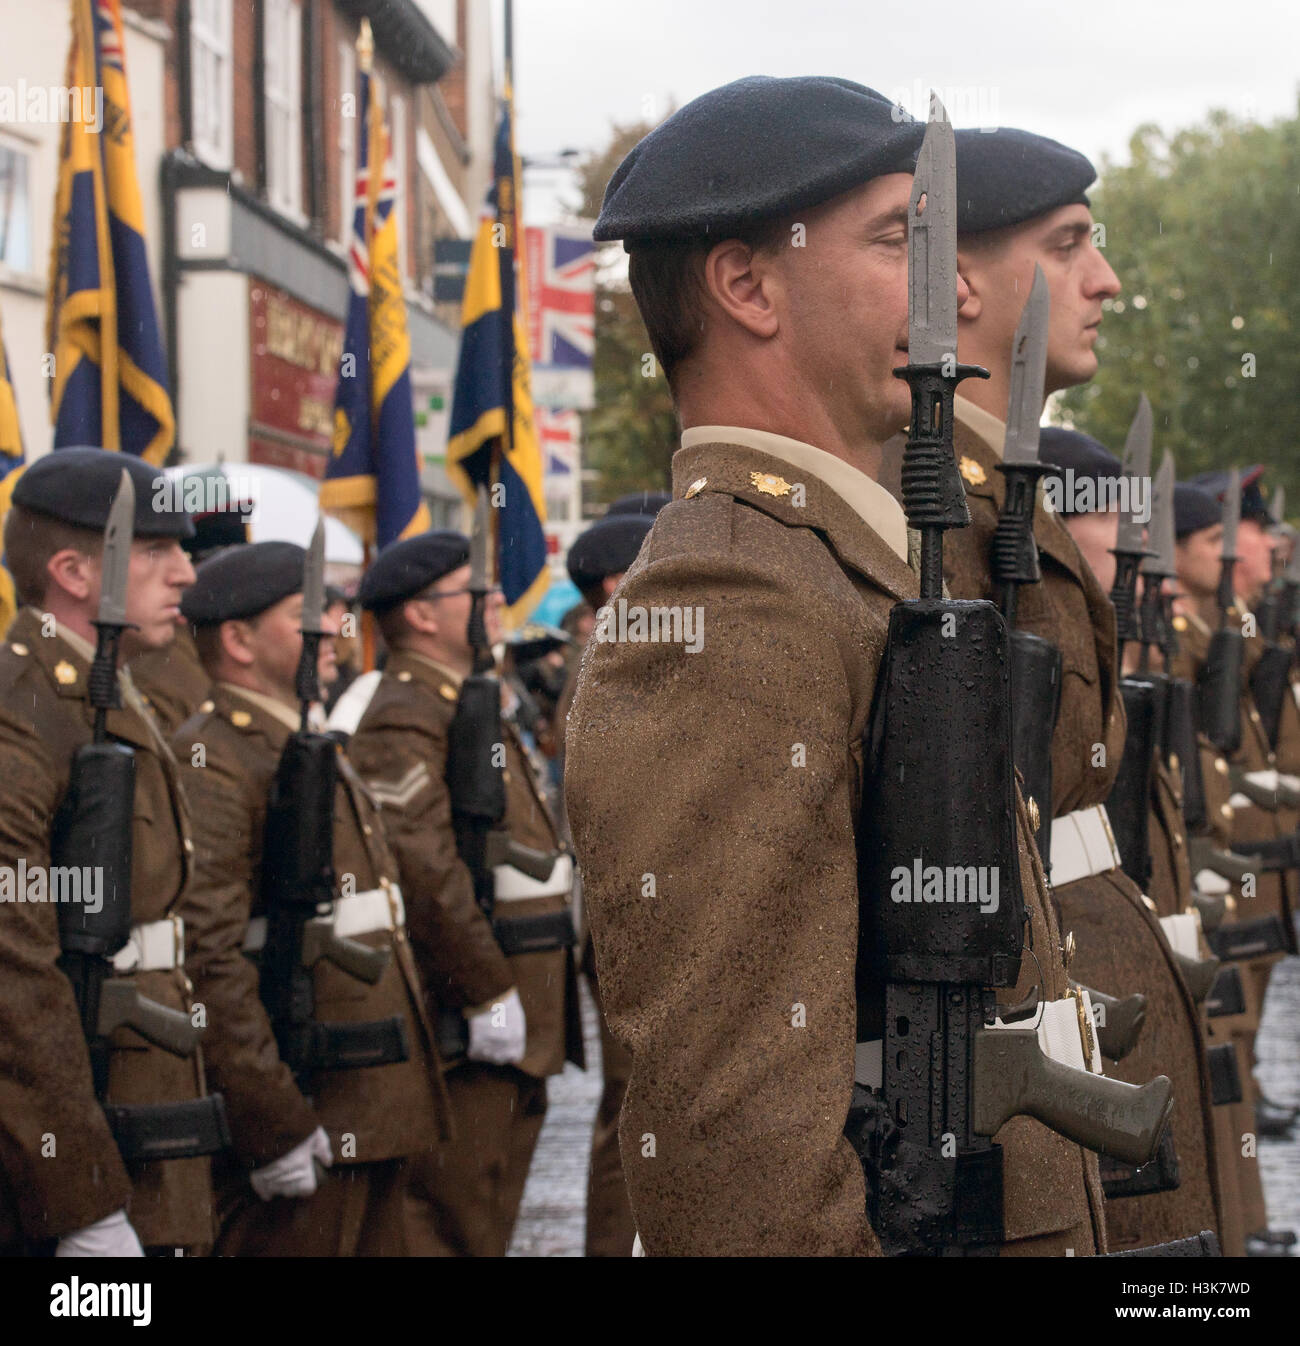 brentwood, Essex, 9th October 2016, 124 Transport Squadron in Freedom of Entry ceremony in Brentwood, Essex with heavy rain Credit:  Ian Davidson/Alamy Live News Stock Photo